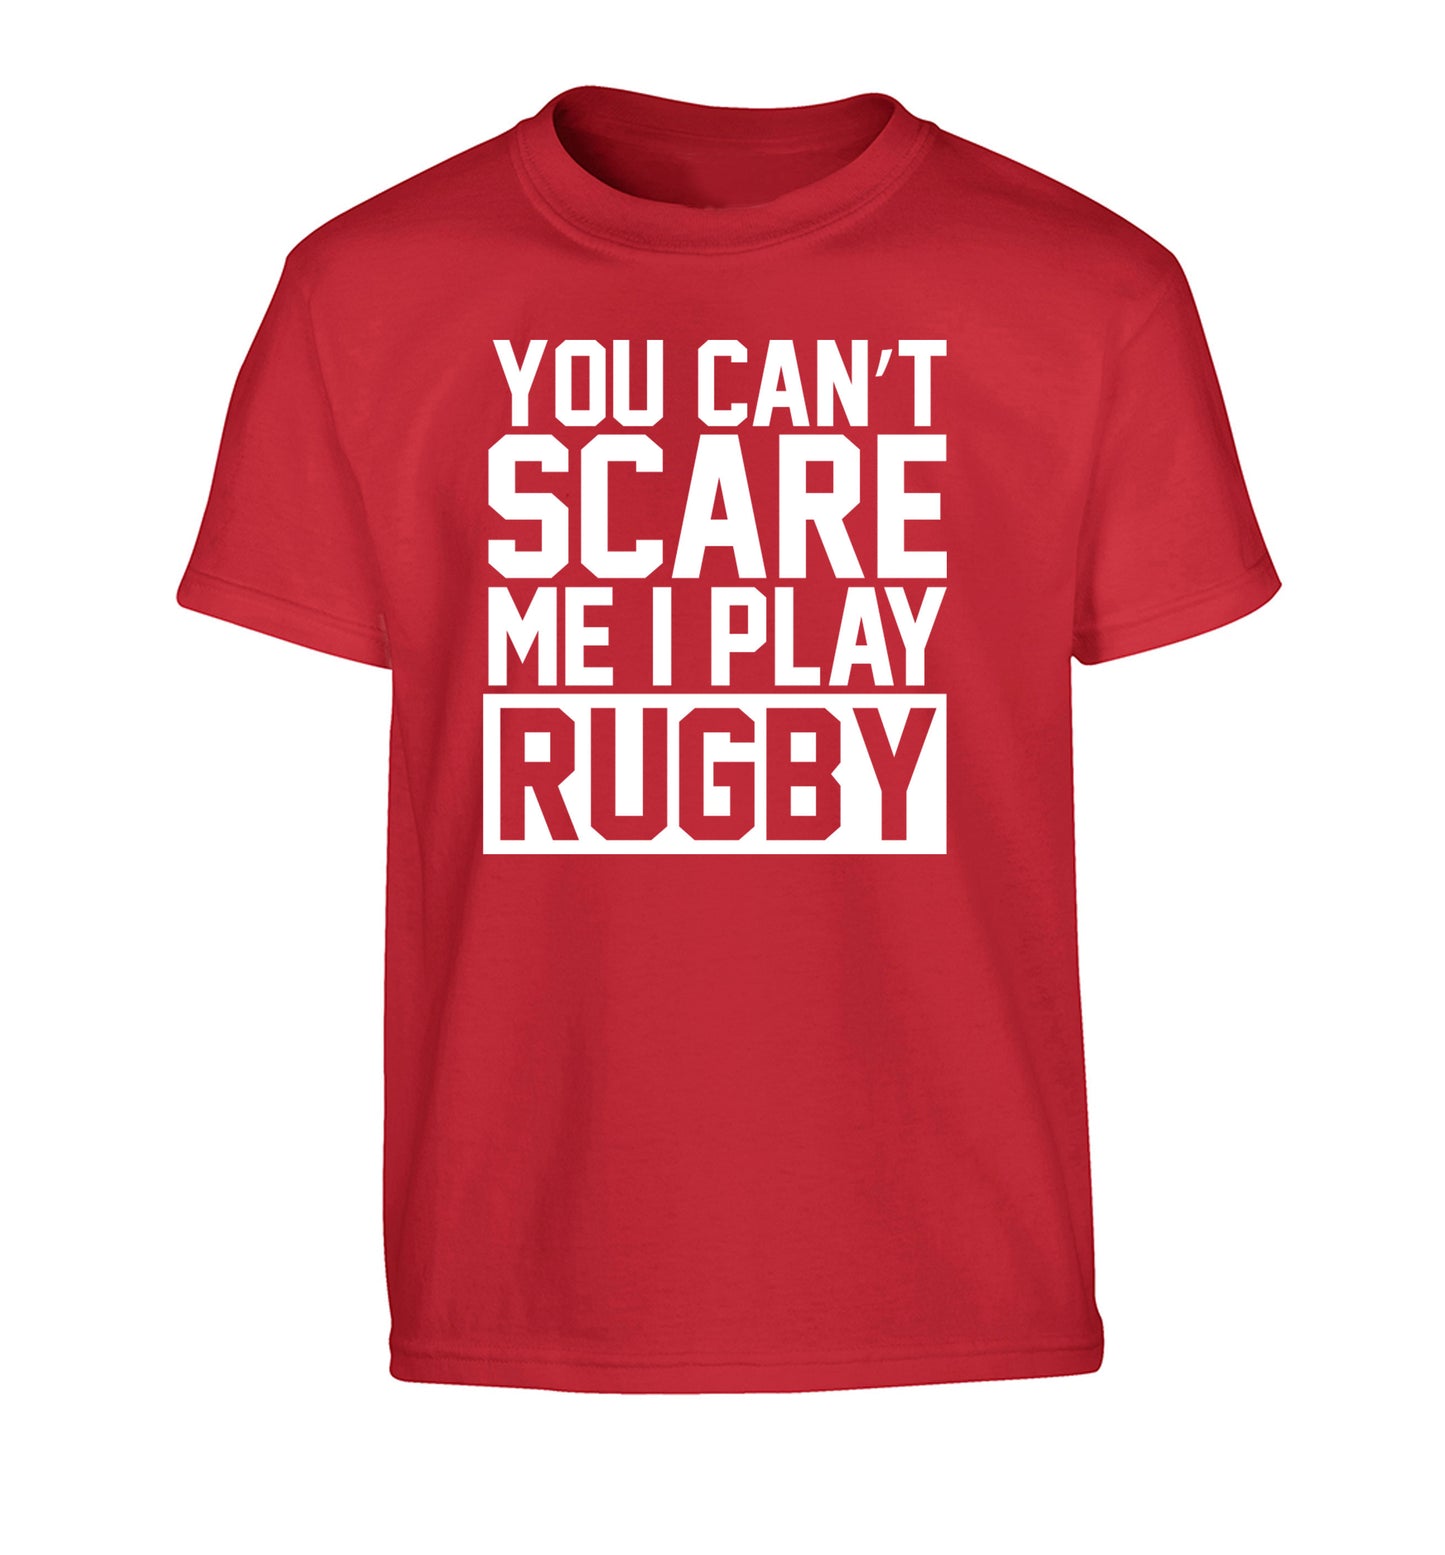 You can't scare me I play rugby Children's red Tshirt 12-14 Years